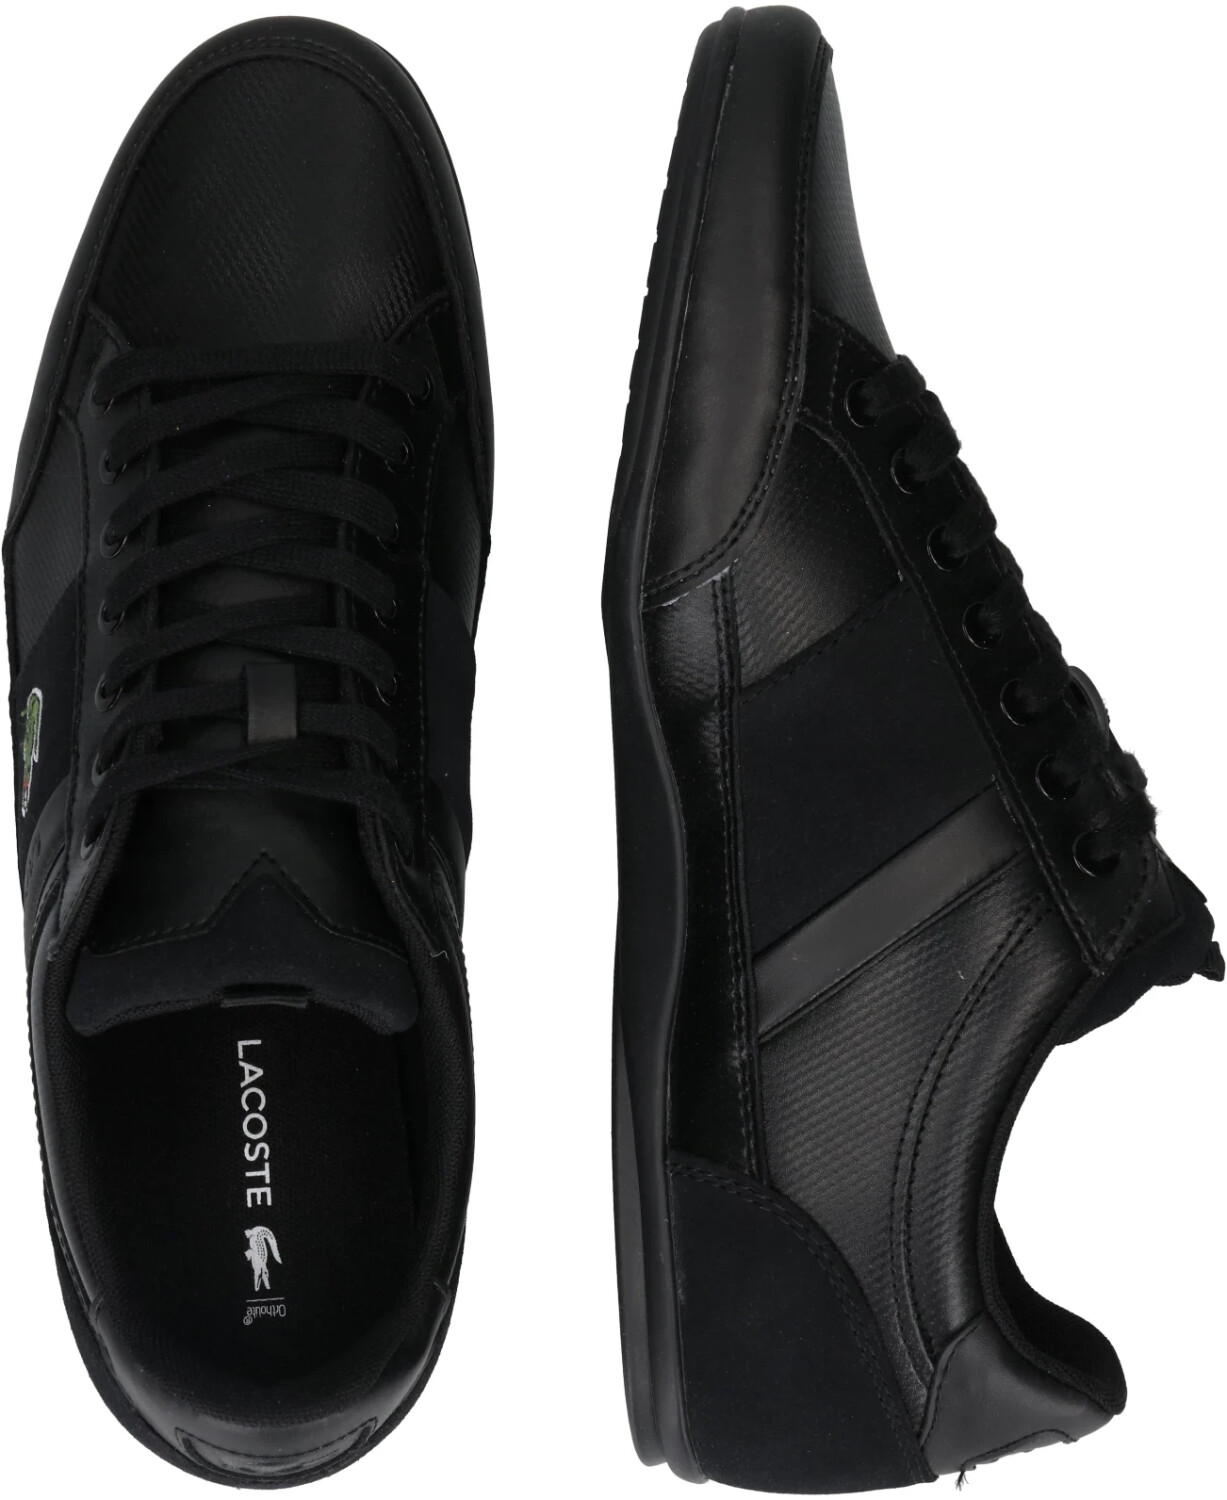 Buy Lacoste Chaymon BL 22 2 Cma black/black from £91.00 (Today) – Best ...